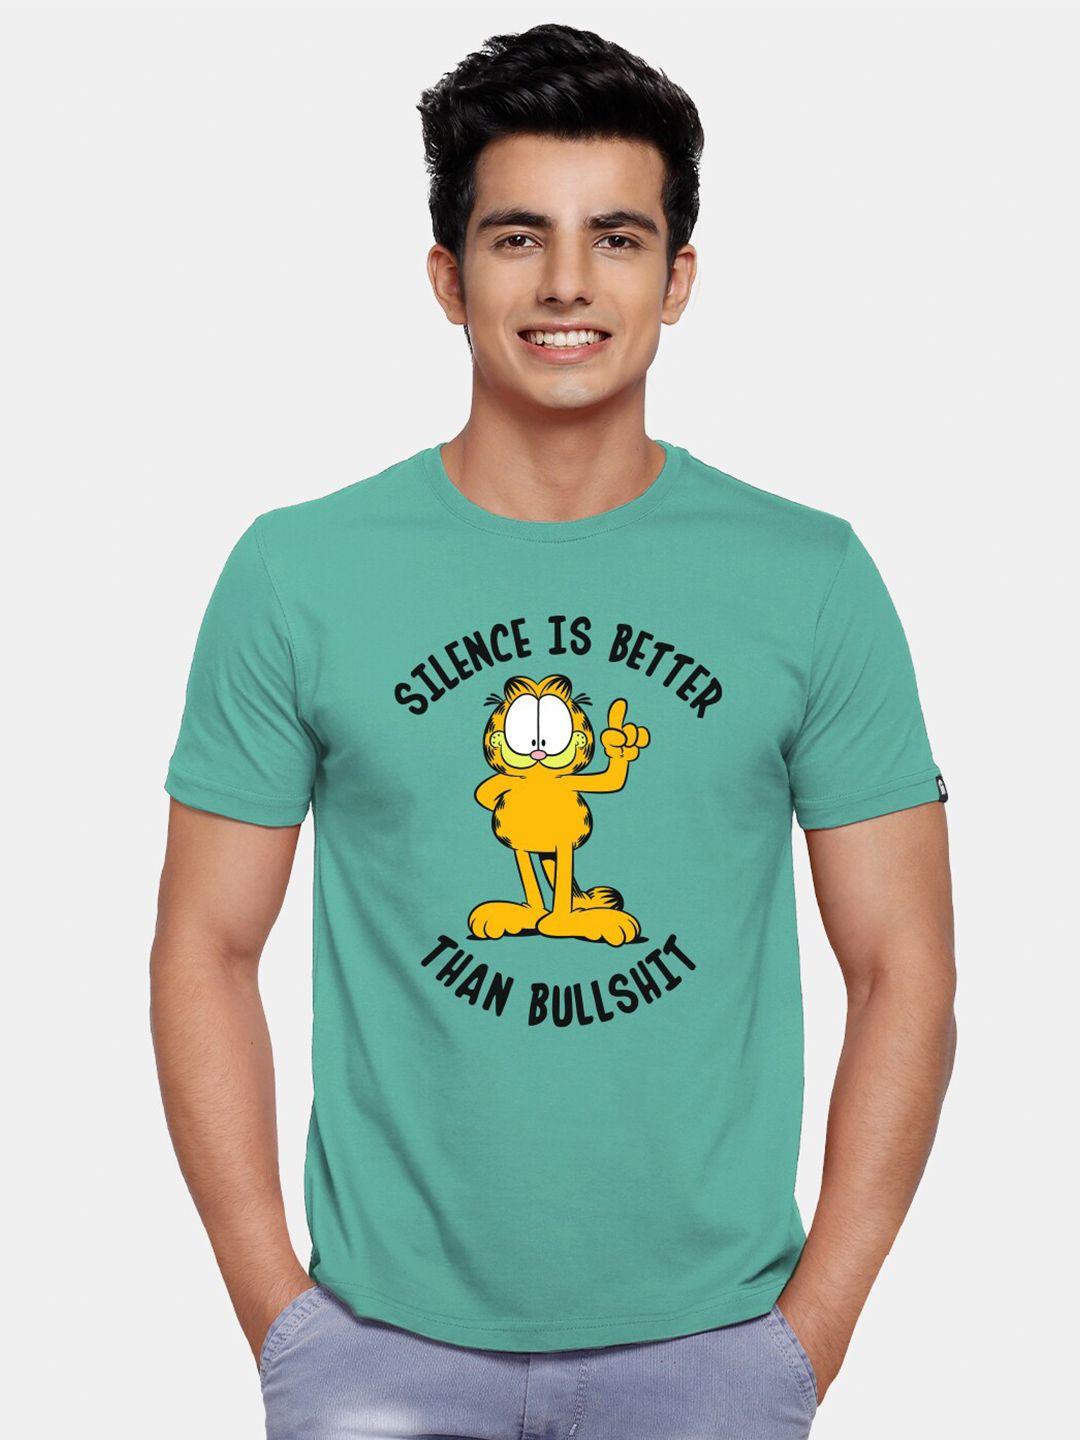 the-souled-store-men-green-typography-garfield-printed-pure-cotton-t-shirt